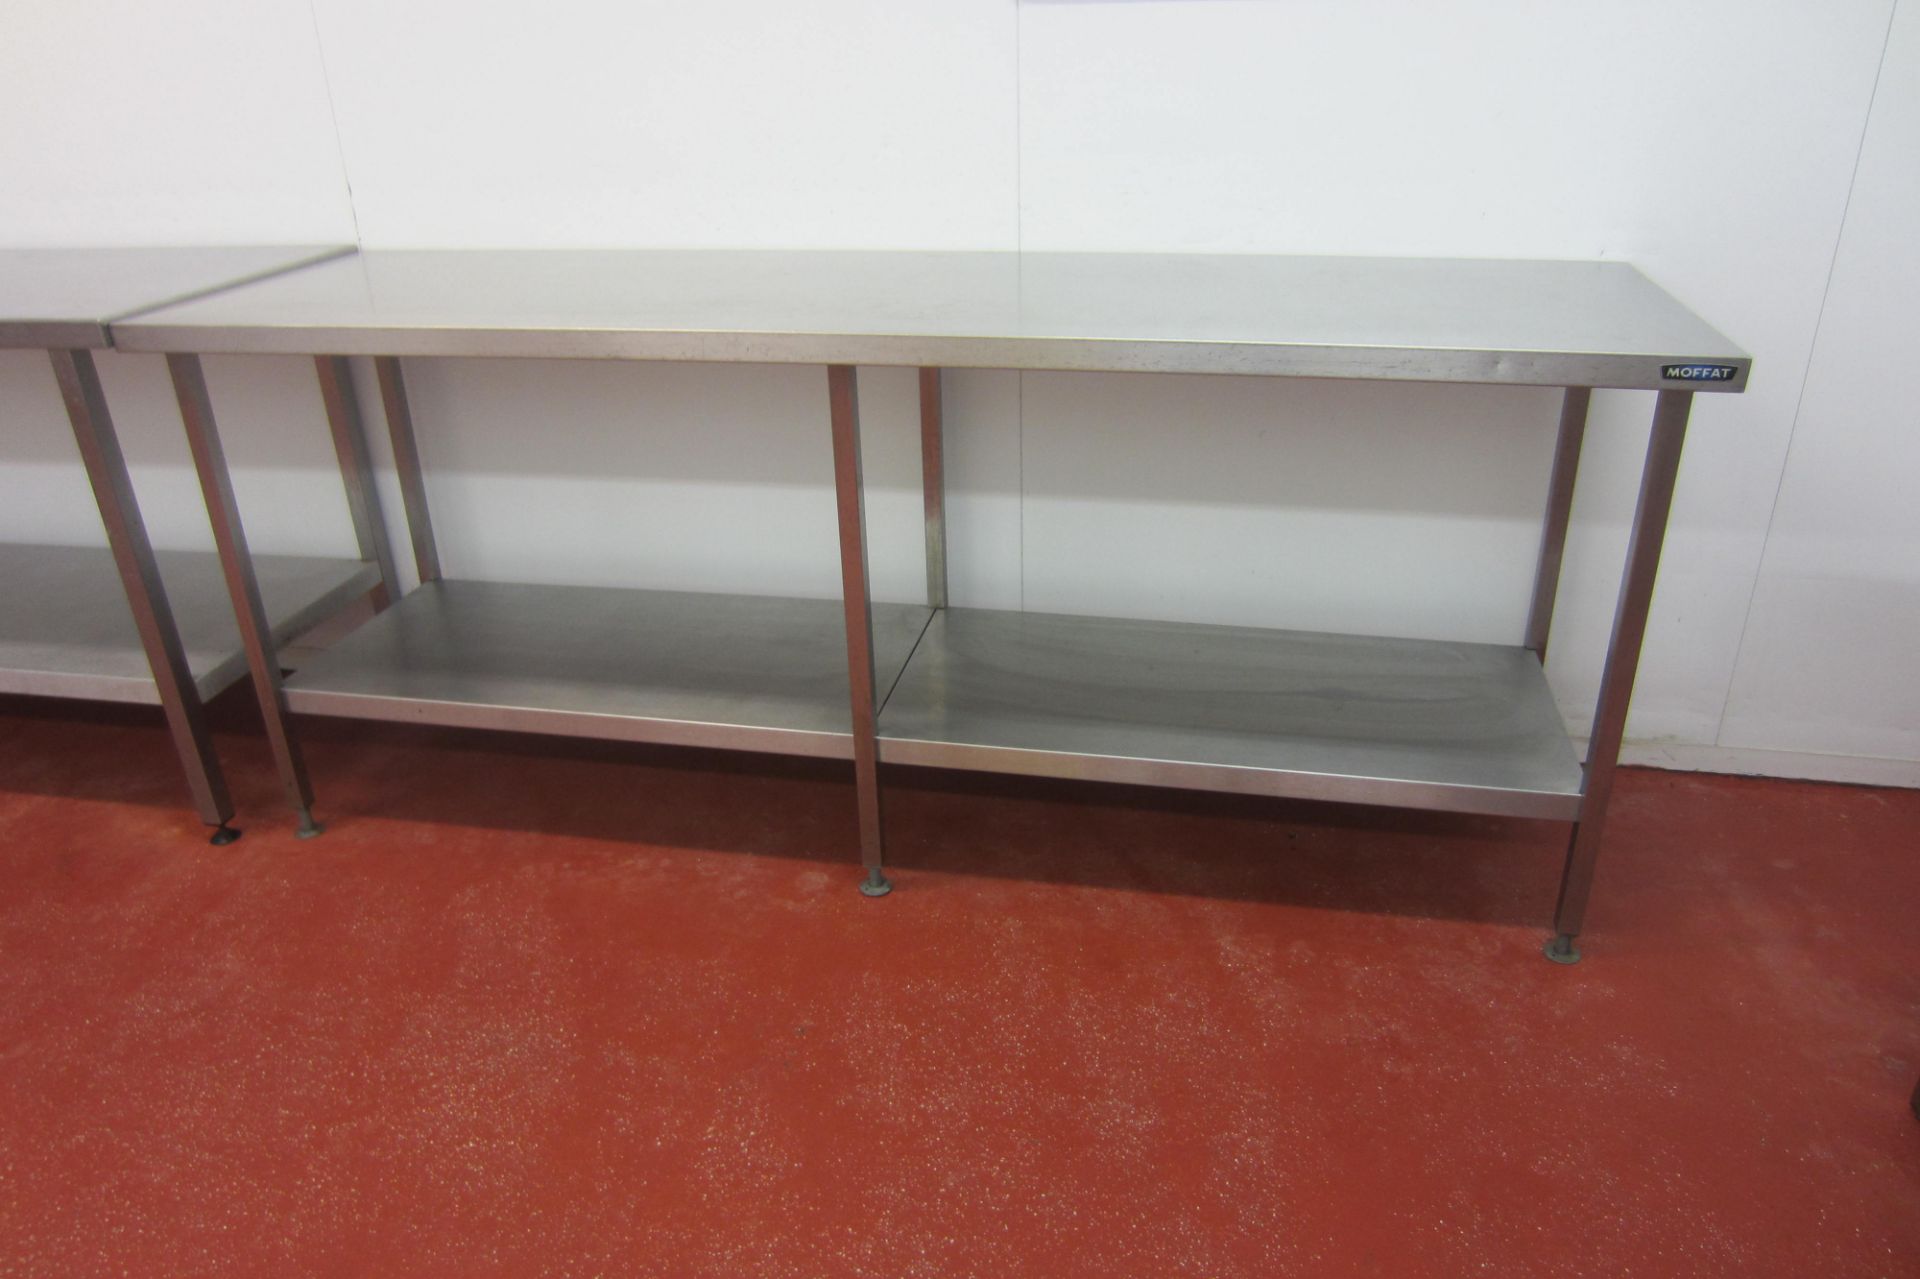 4 x Stainless Steel Prep/Work Tables with Shelves Under. Size 1 x 175cm x 70cm, 1 x 180cm x 70cm, - Image 3 of 6